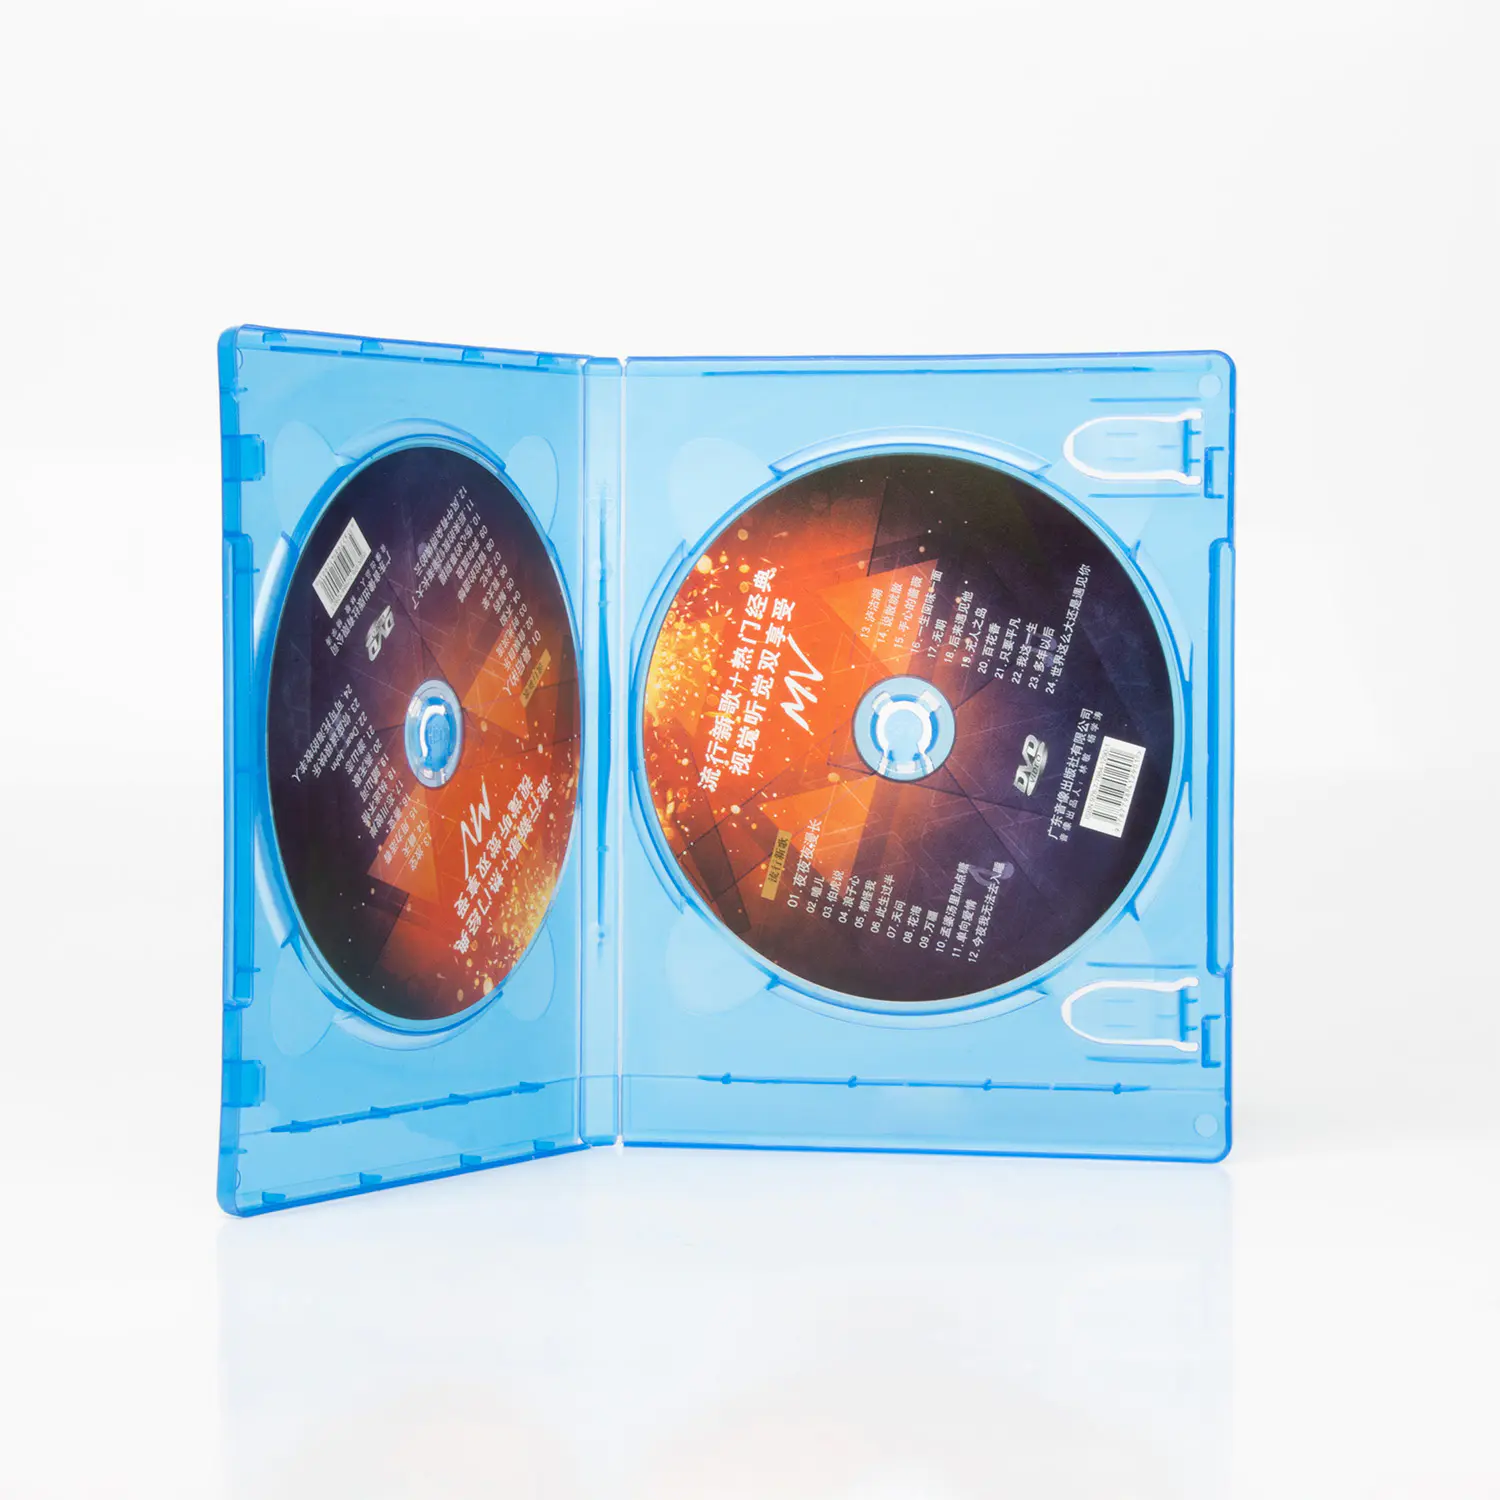 Empty Standard Double Blue Replacement Boxes / Cases for Blu-Ray Disc Movies